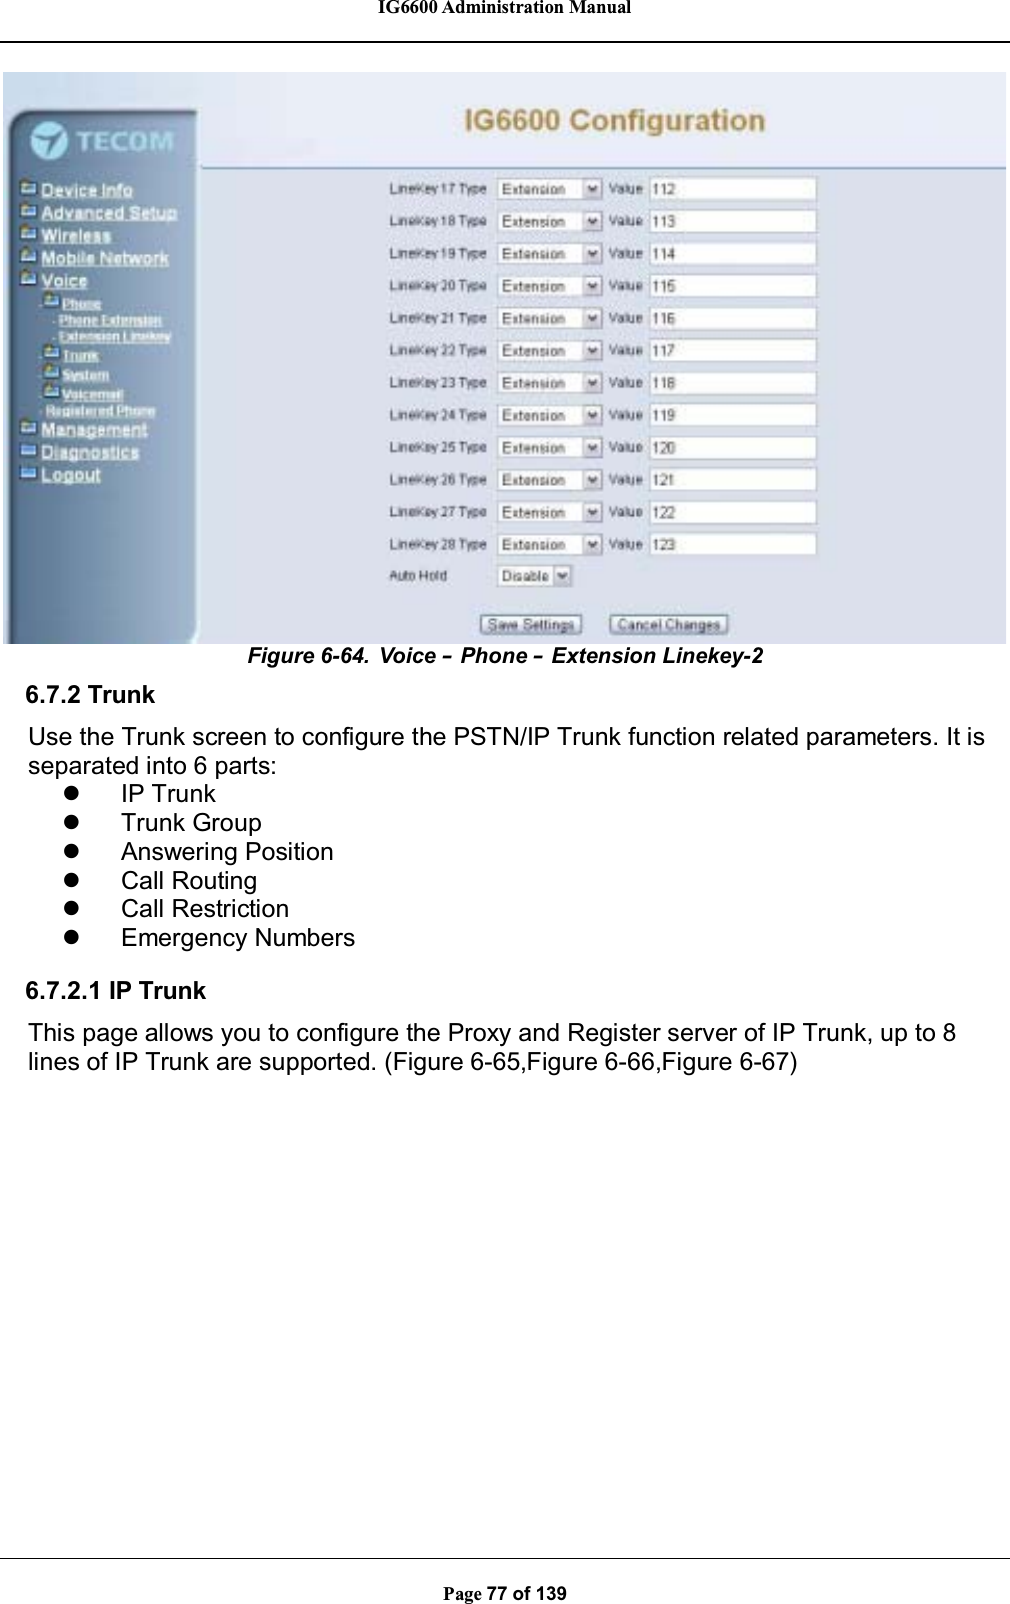 IG6600 Administration ManualPage 77 of 139Figure 6-64. Voice –Phone –Extension Linekey-26.7.2 TrunkUse the Trunk screen to configure the PSTN/IP Trunk function related parameters. It isseparated into 6 parts:zIP TrunkzTrunk GroupzAnswering PositionzCall RoutingzCall RestrictionzEmergency Numbers6.7.2.1 IP TrunkThis page allows you to configure the Proxy and Register server of IP Trunk, up to 8lines of IP Trunk are supported. (Figure 6-65,Figure 6-66,Figure 6-67)